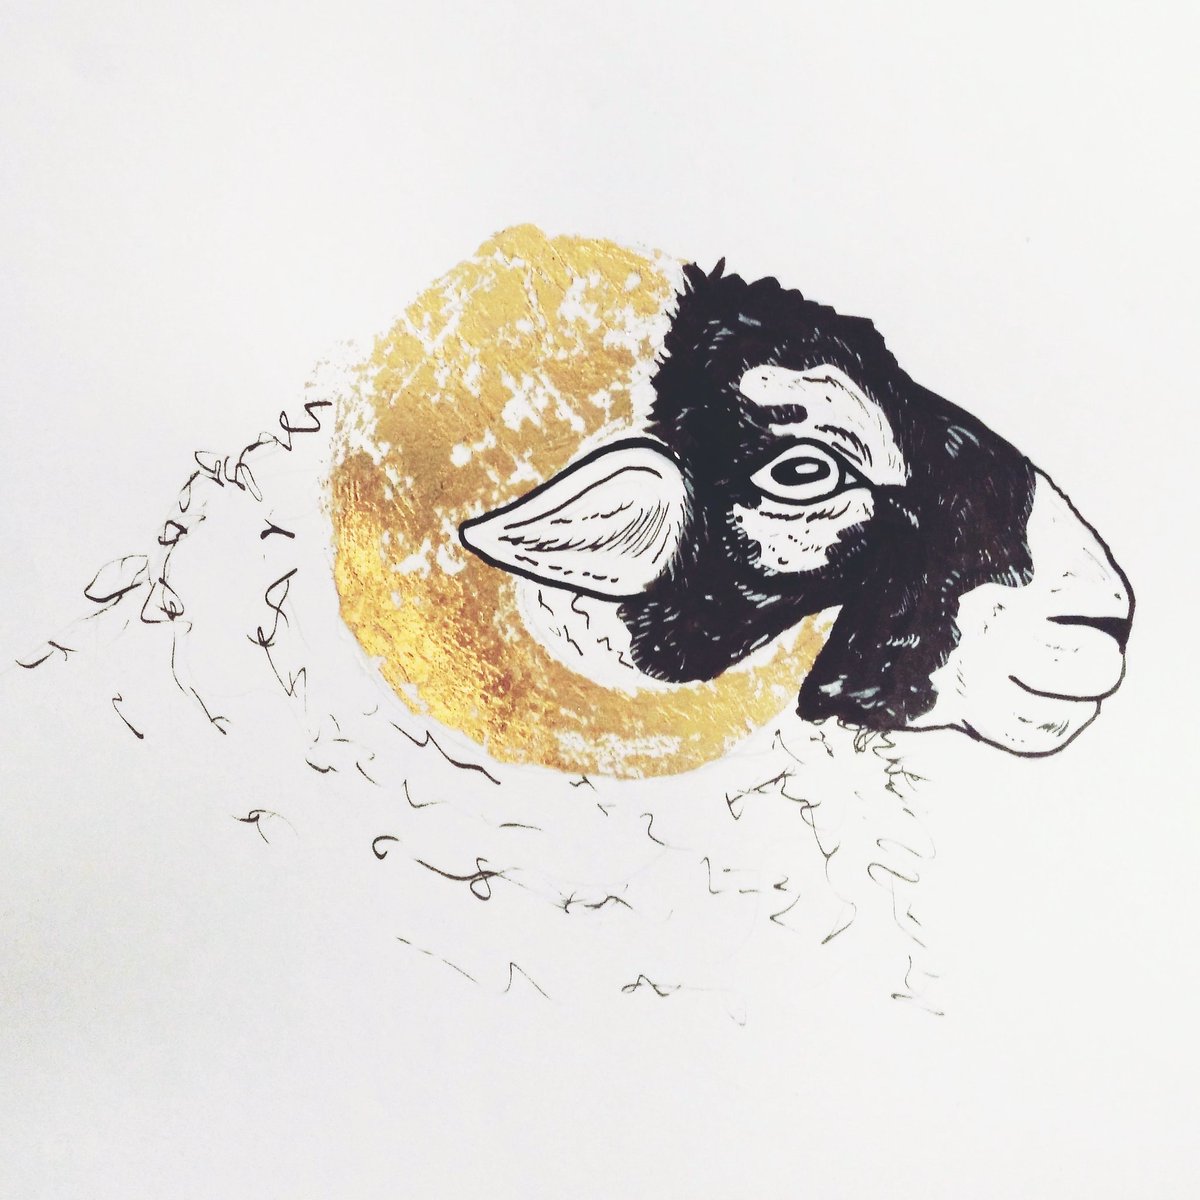 Testing how to do bronze foil printing today! I'm in love, look how shiny it is 😍🐑 #printingprocess #bronzefoil #foilprint #bronze #inksketch #dippen #sketch #illustration #winsorandnewton #printmaker #printroom #printmaking #indianink #sheep #Sheep365 #farm #HandmadeHour